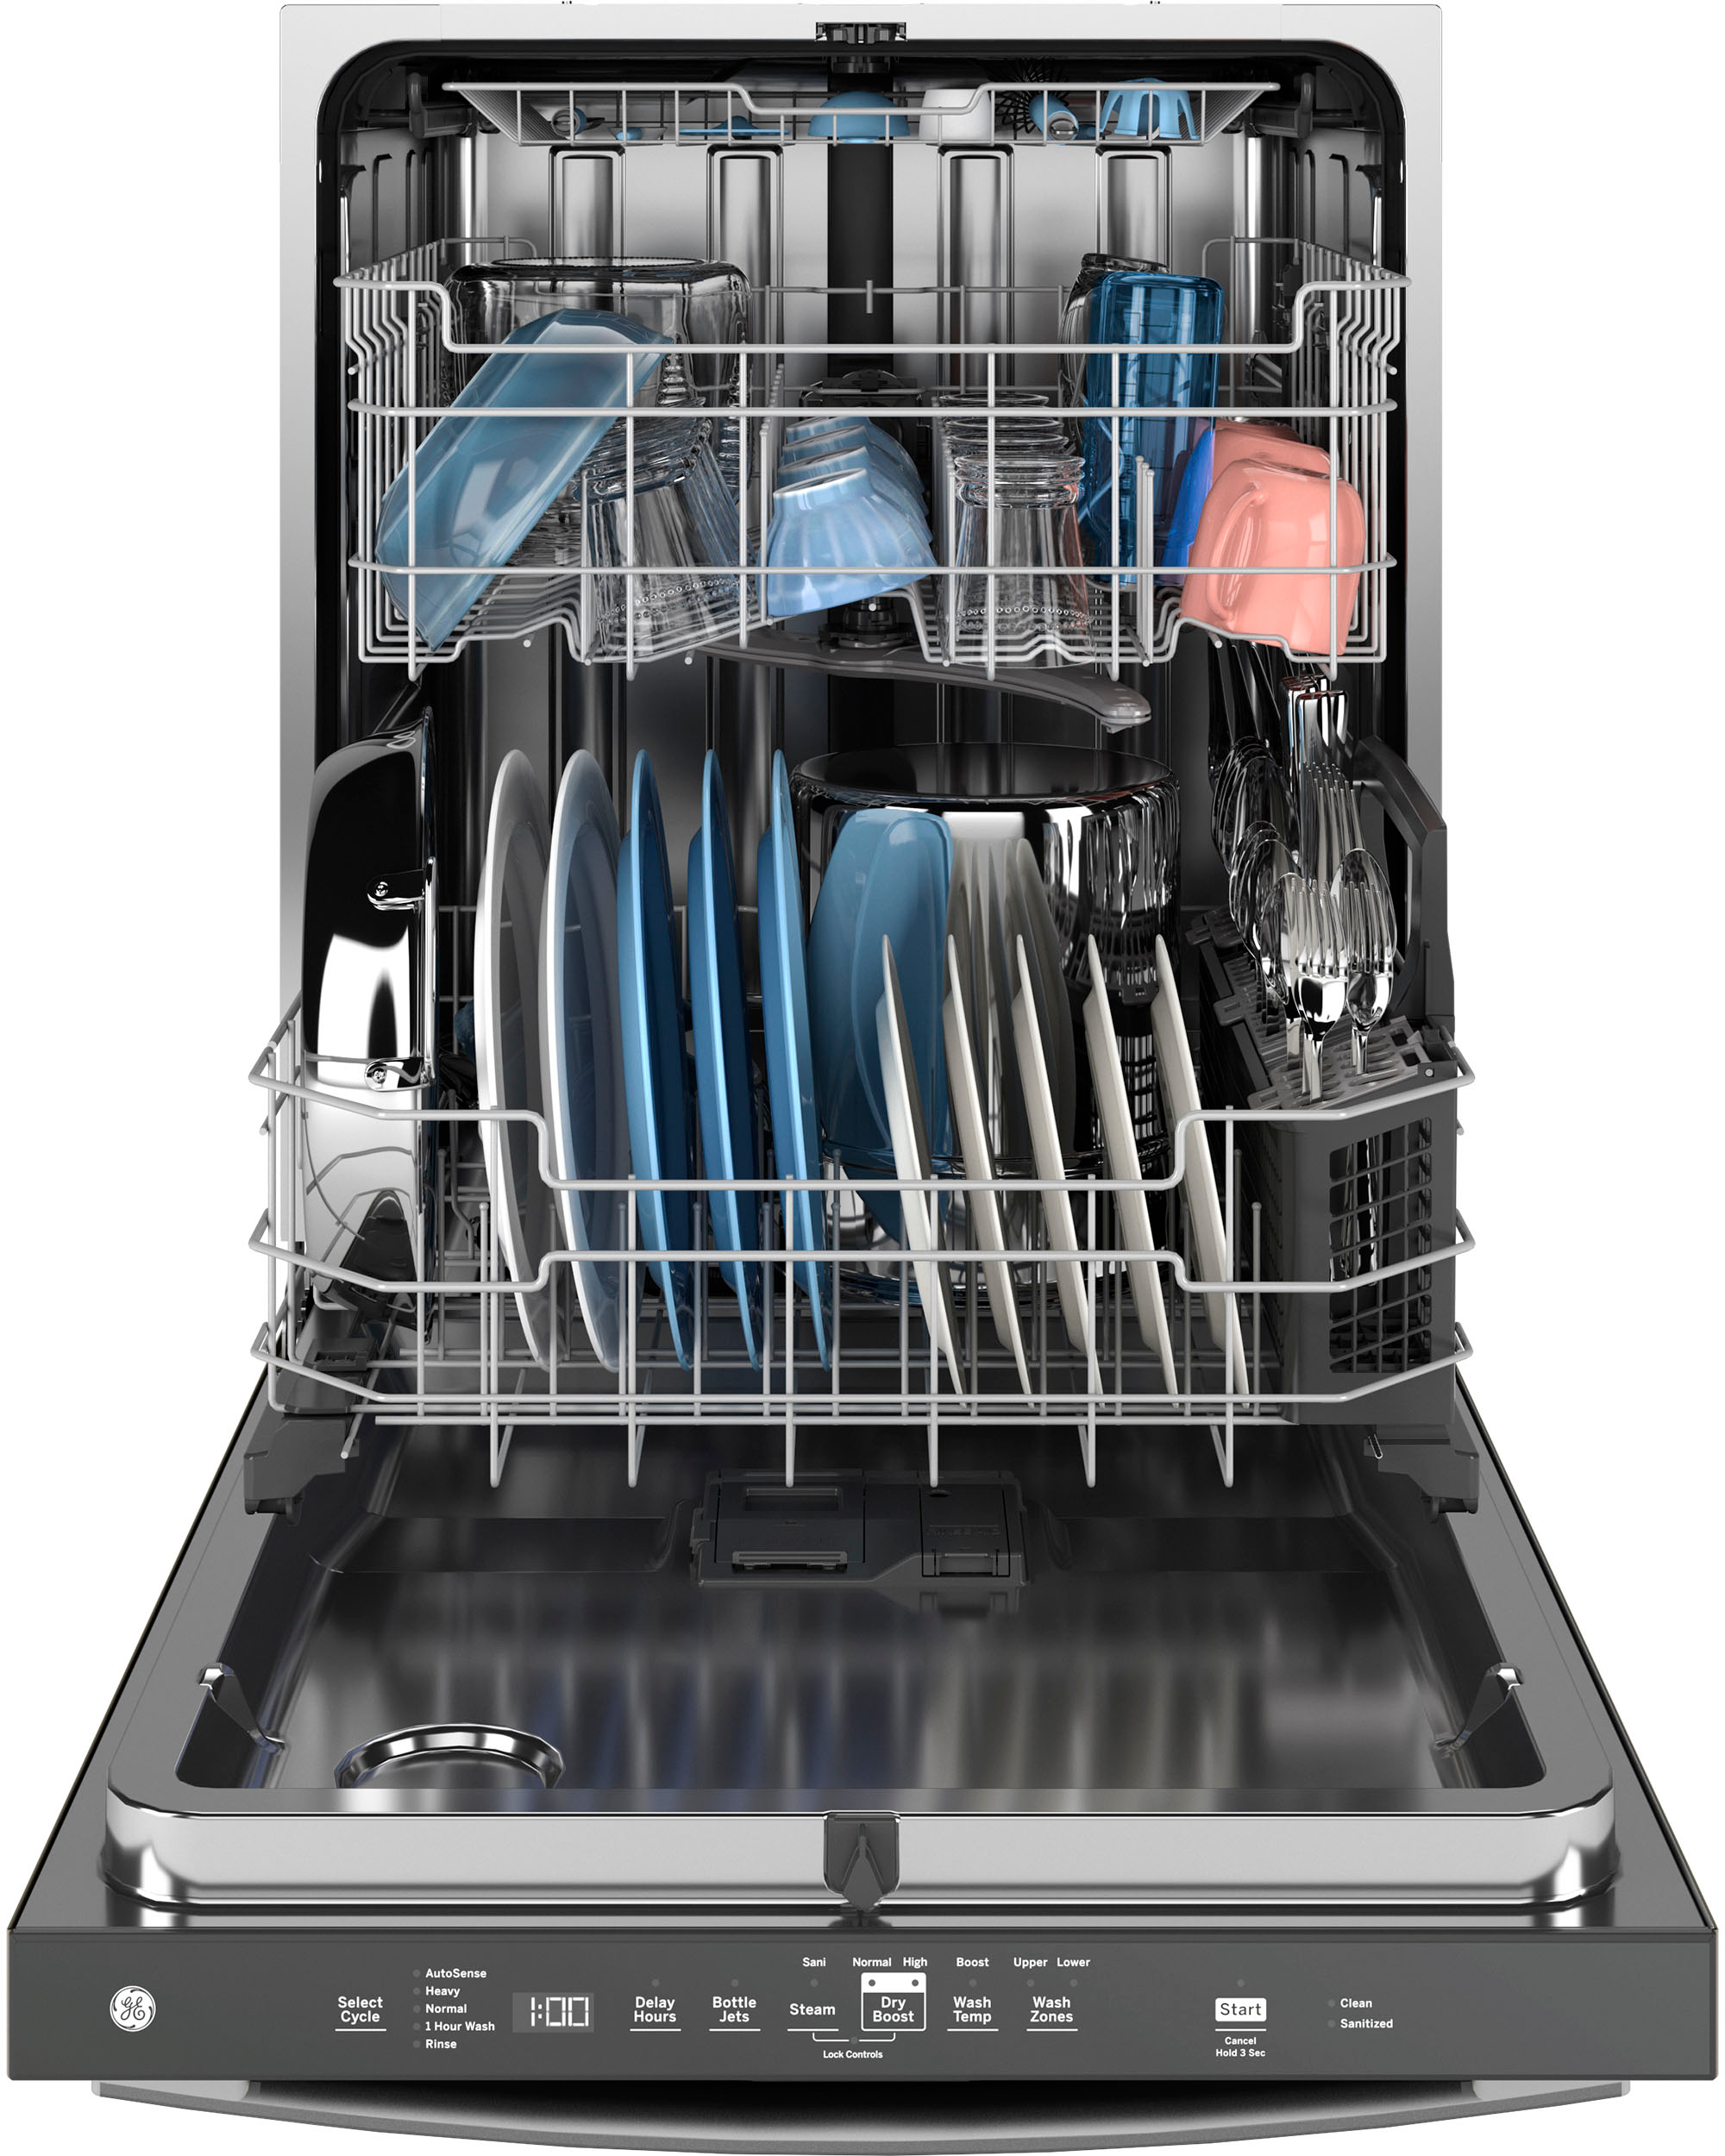 Left View: GE - 24"Top Control Fingerprint Resistant Dishwasher with Stainless Steel Interior Dishwasher with Sanitize Cycle - Stainless Steel